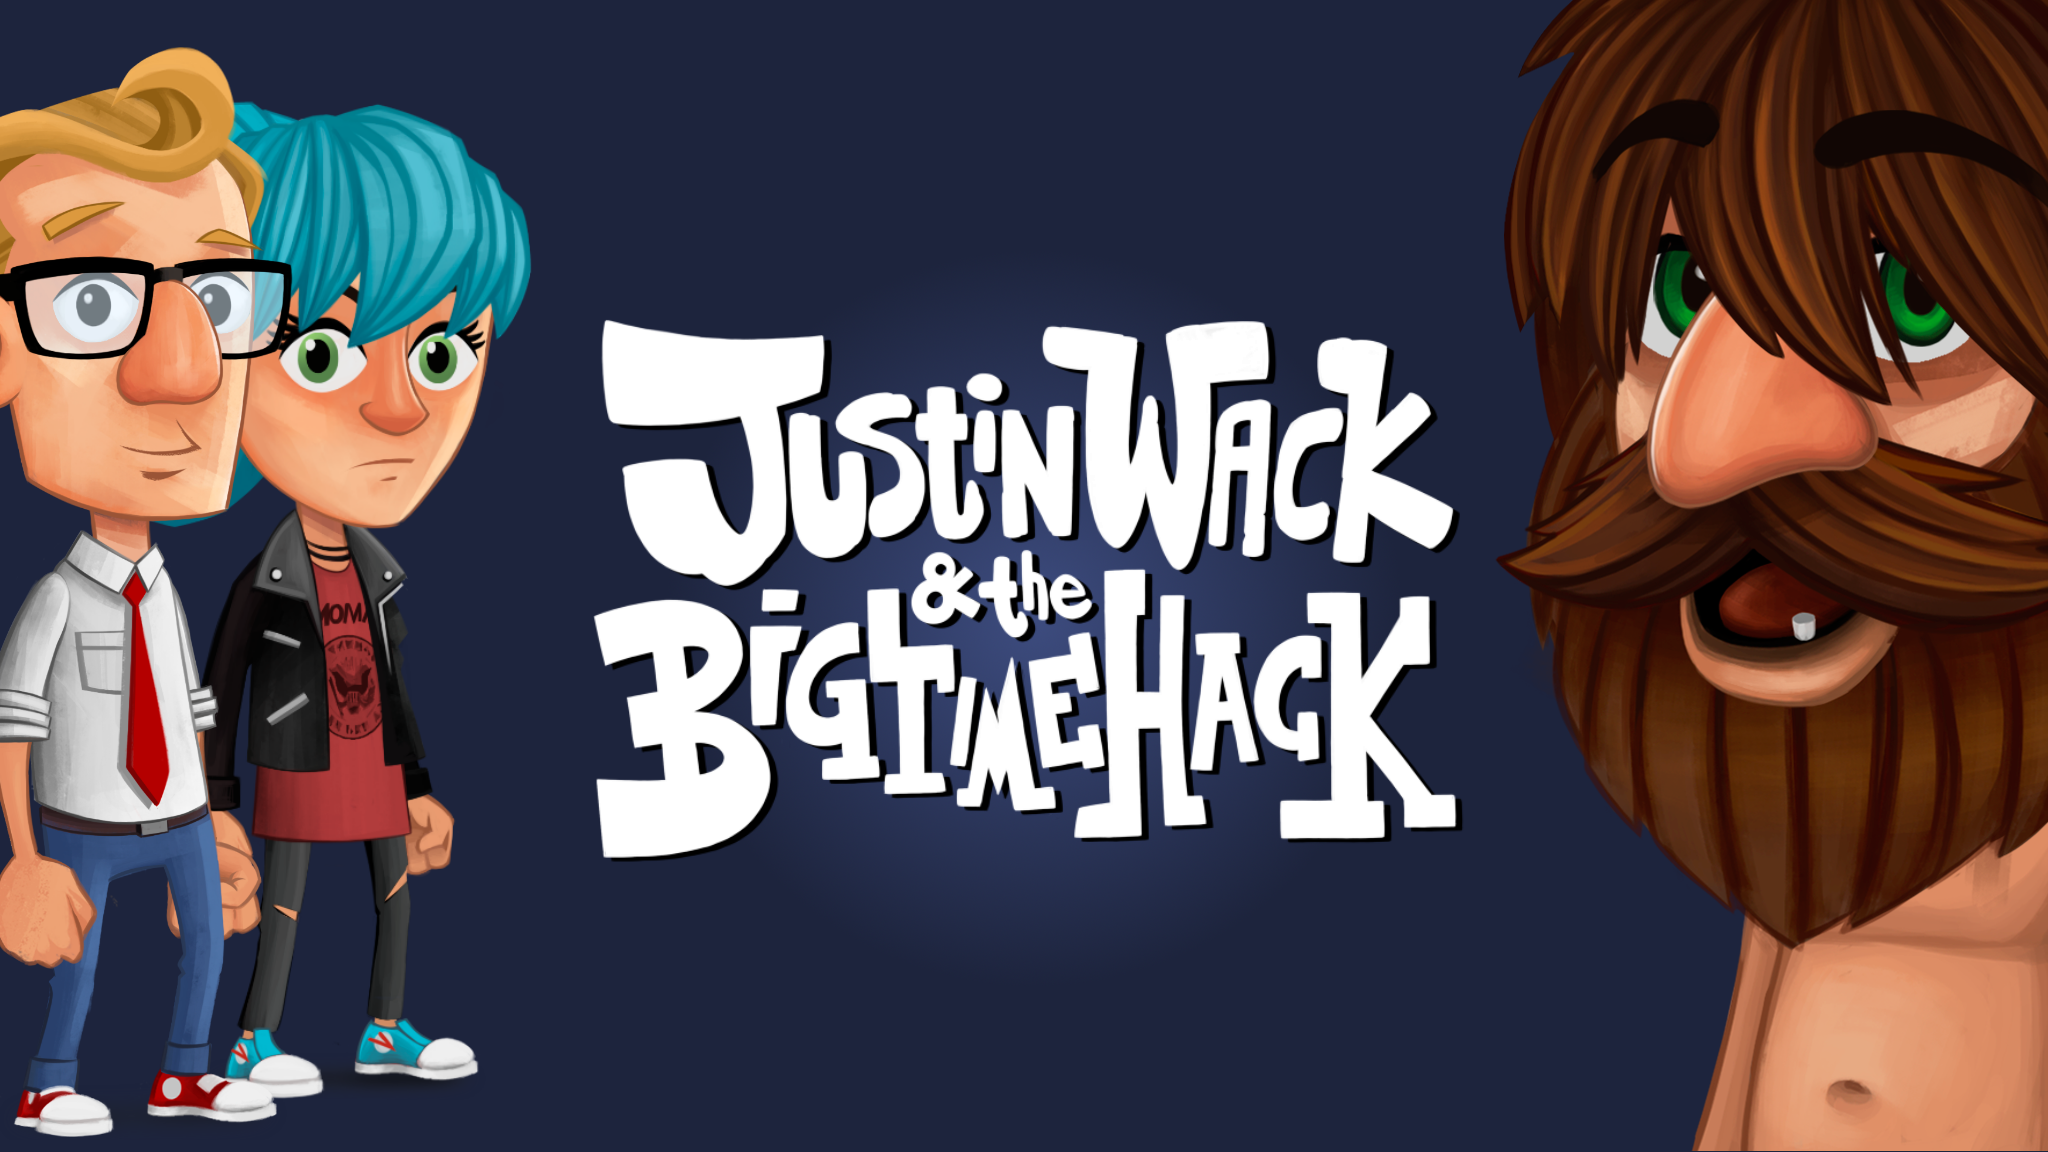 Justin Wack and the Big Time Hack for mac download free